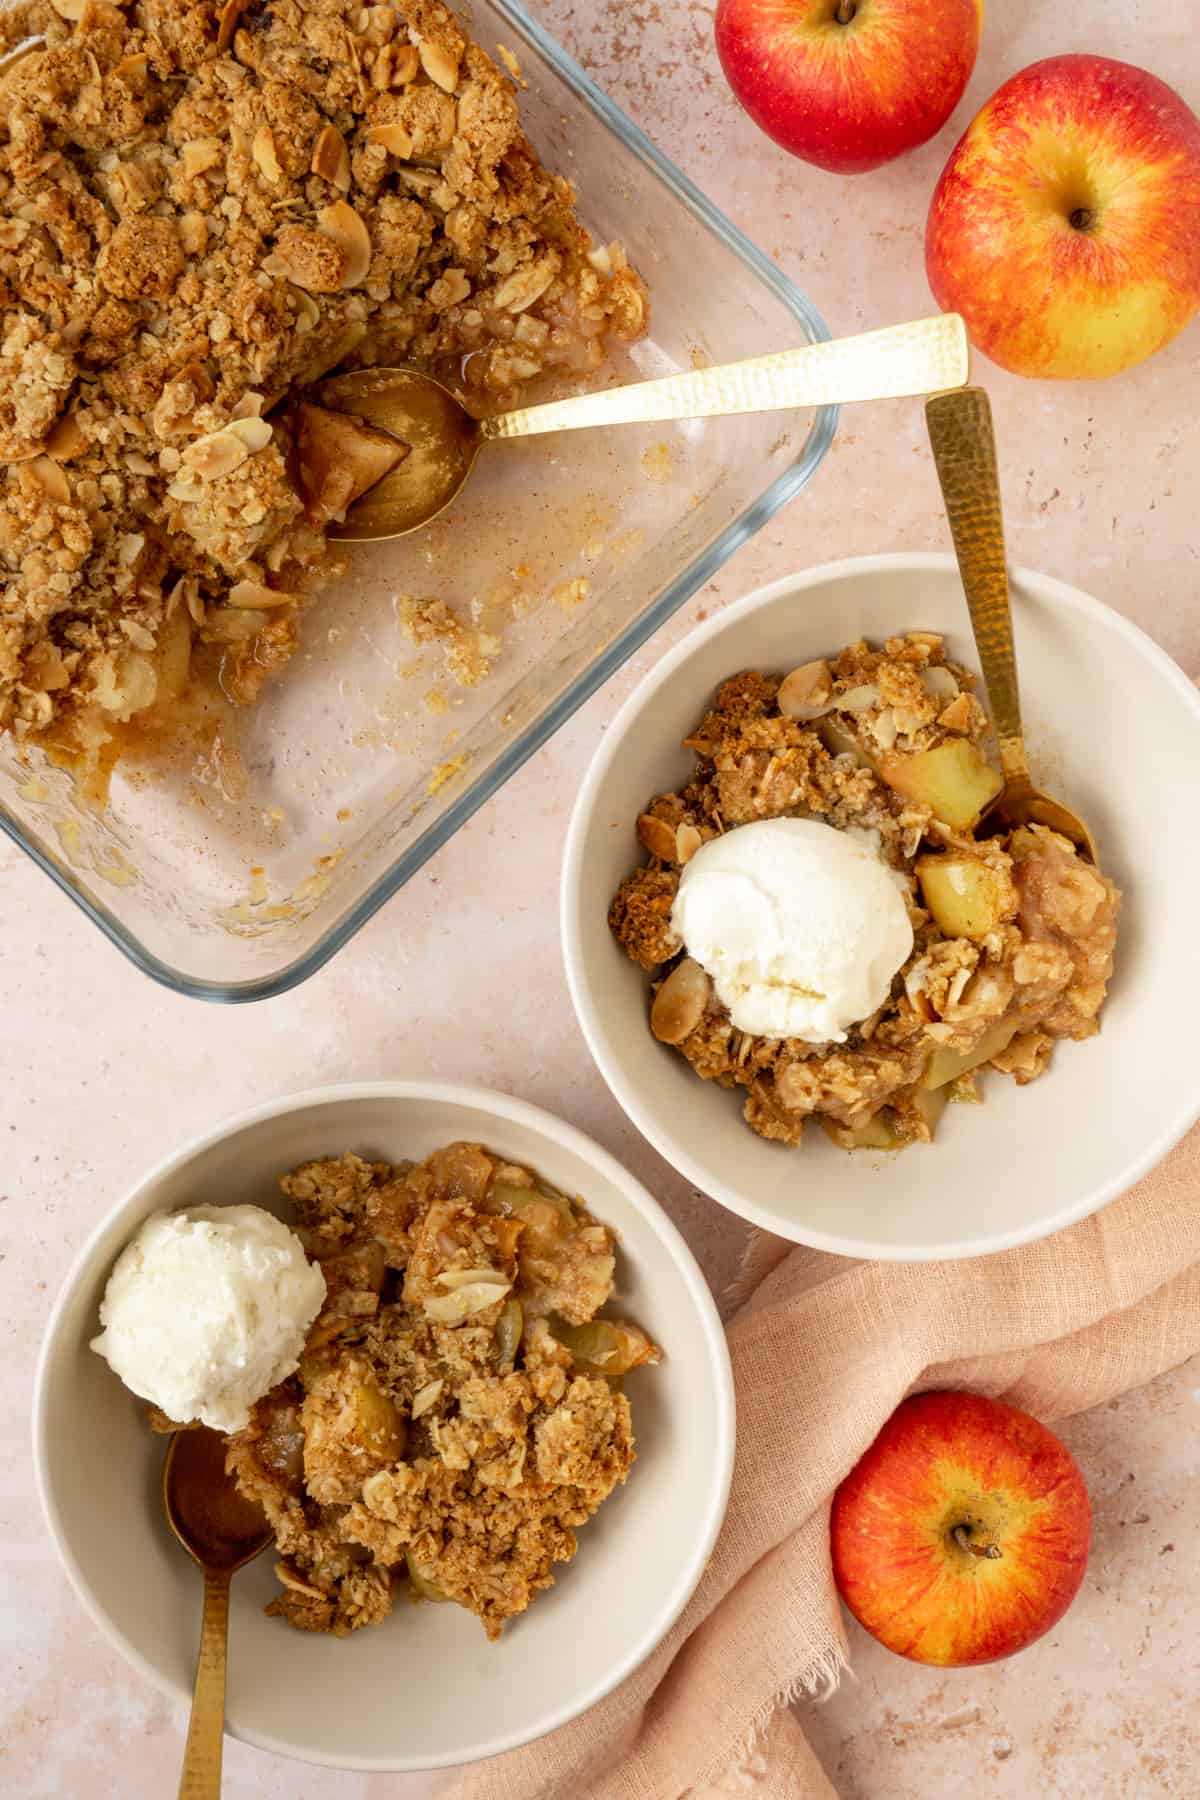 Two servings of GF apple crisp next to the remaining crisp in a dish.